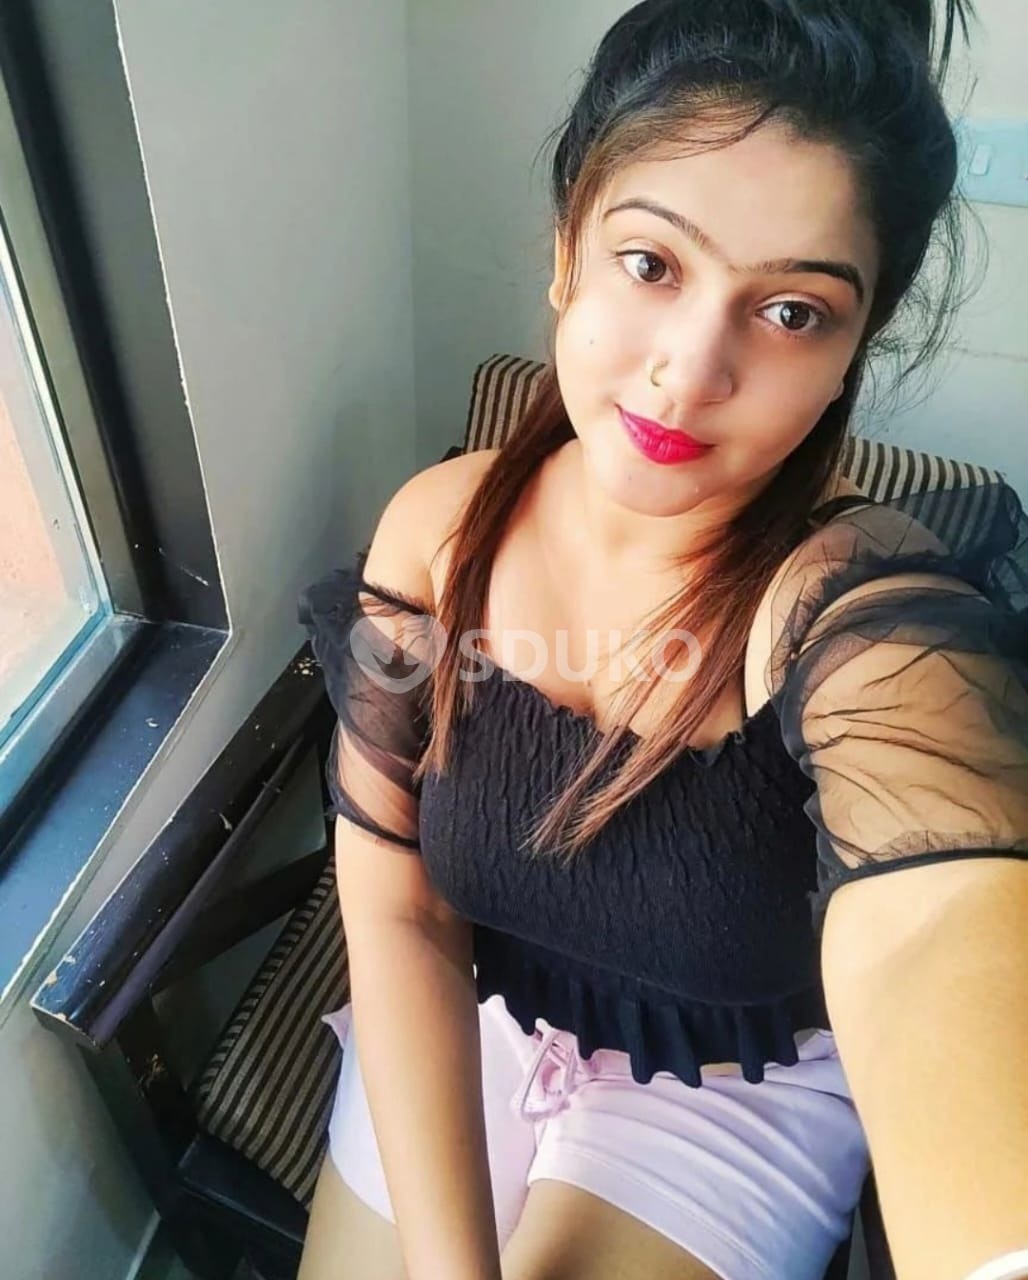 Kolkata New town INDEPENDENT ❣️ LOW-COST BEST HI-PROFILE GENUINE CALL-GIRL SERVICE CALL ME